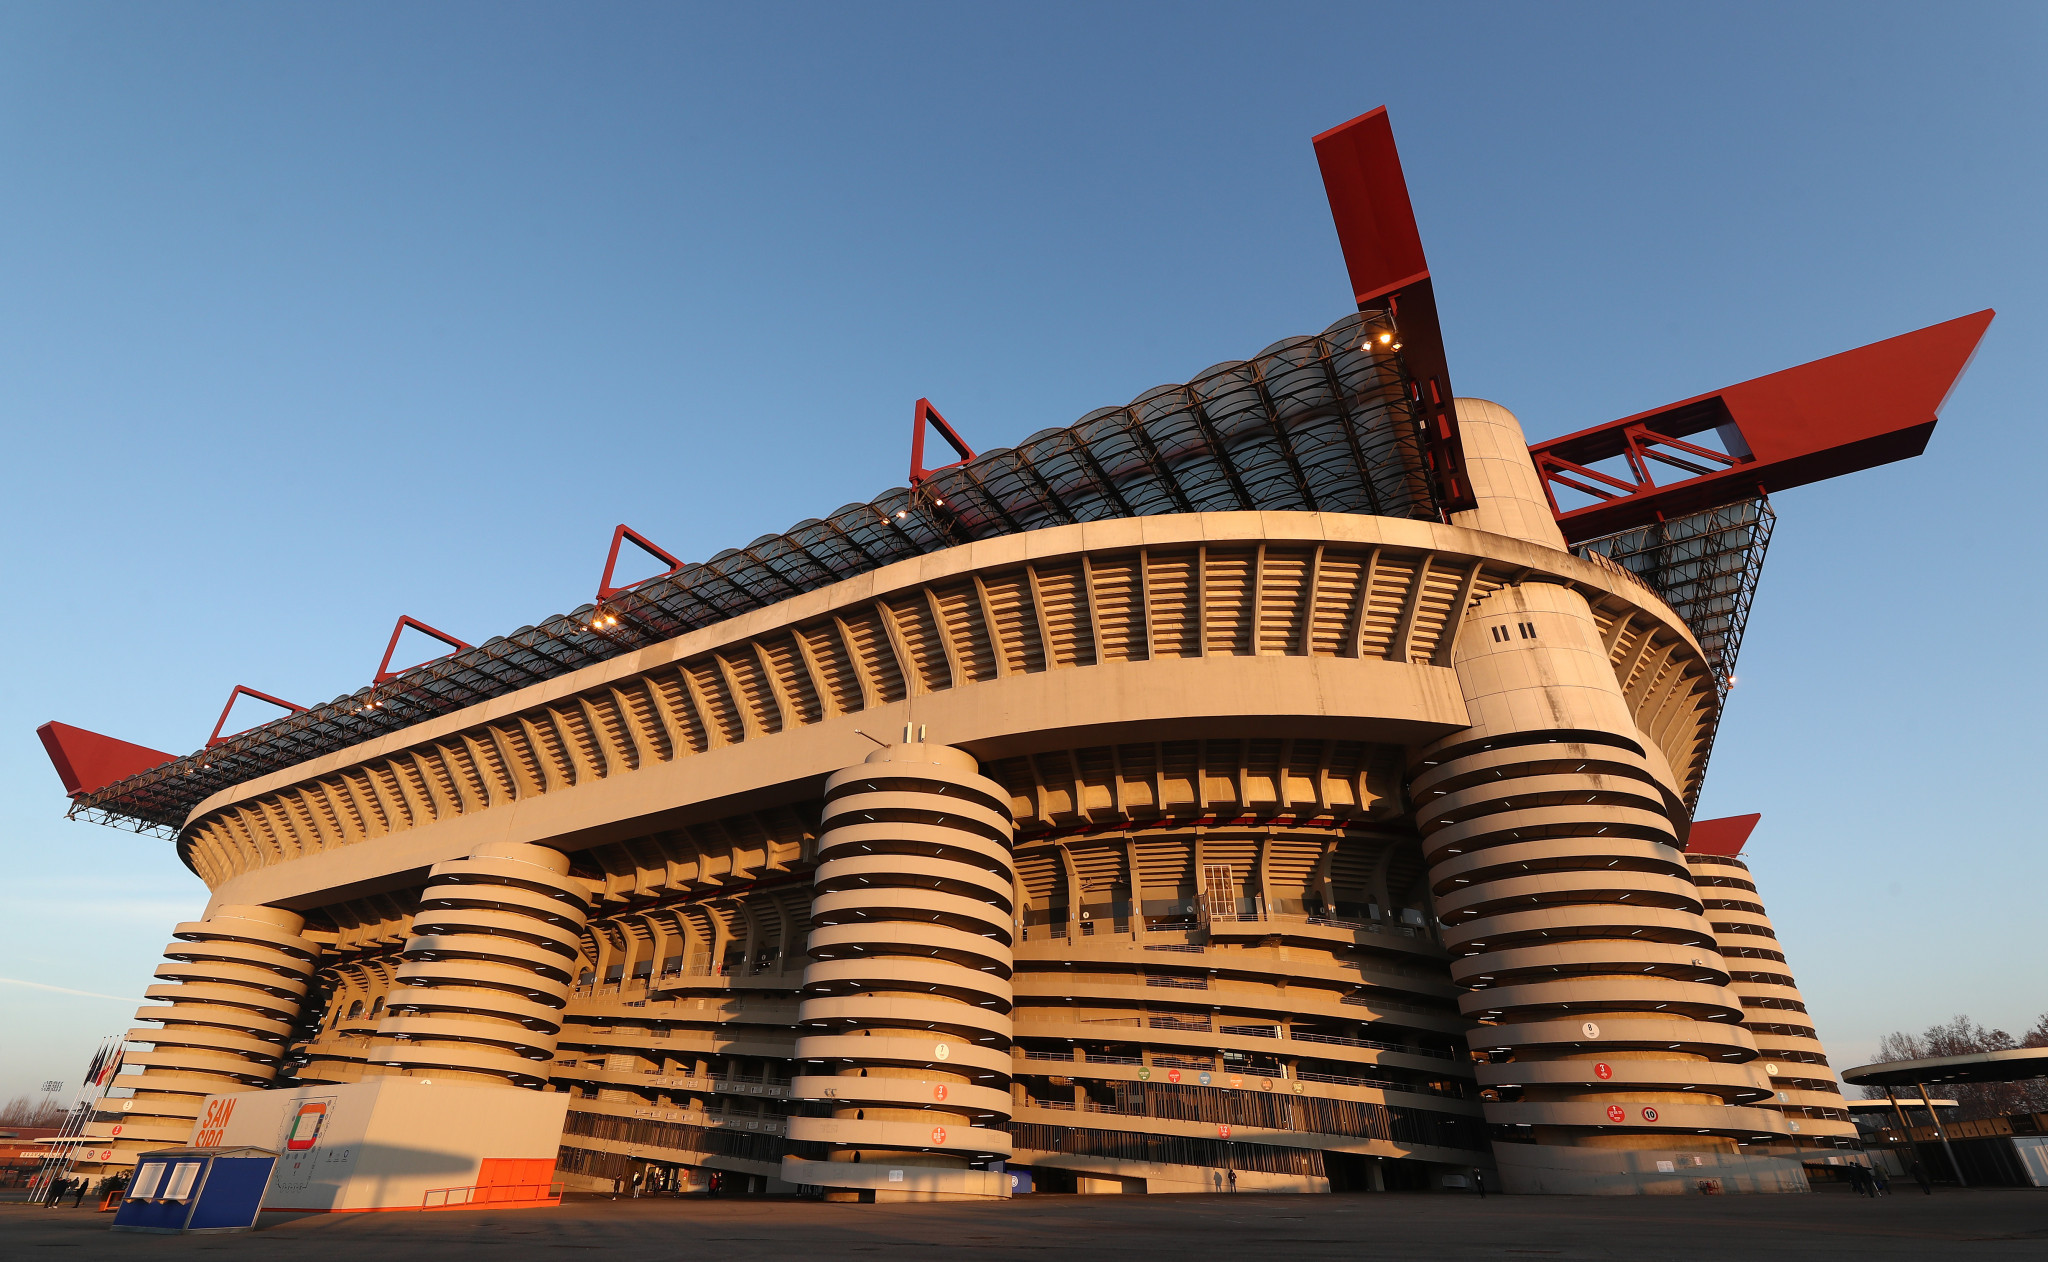 The historic Stadio Giuseppe Meazza, or San Siro, holds more than 80,000 people and was opened in 1926 ©Getty Images